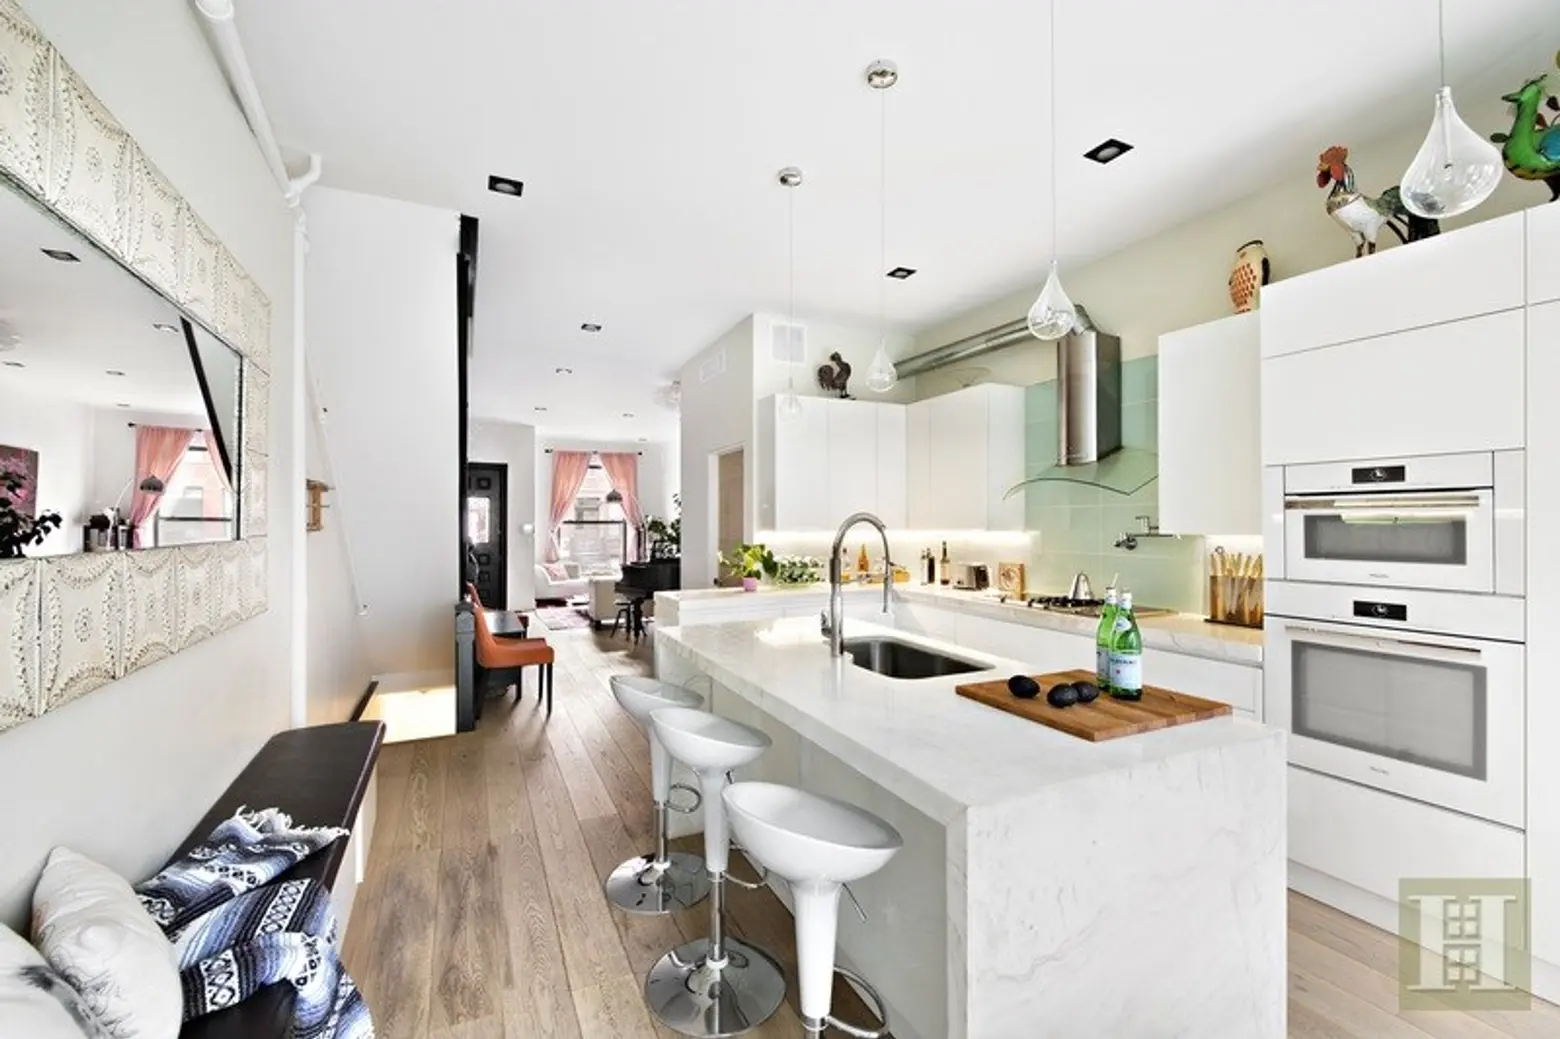 $2.95M for a modernized townhouse with a glass terrace right in Central Harlem